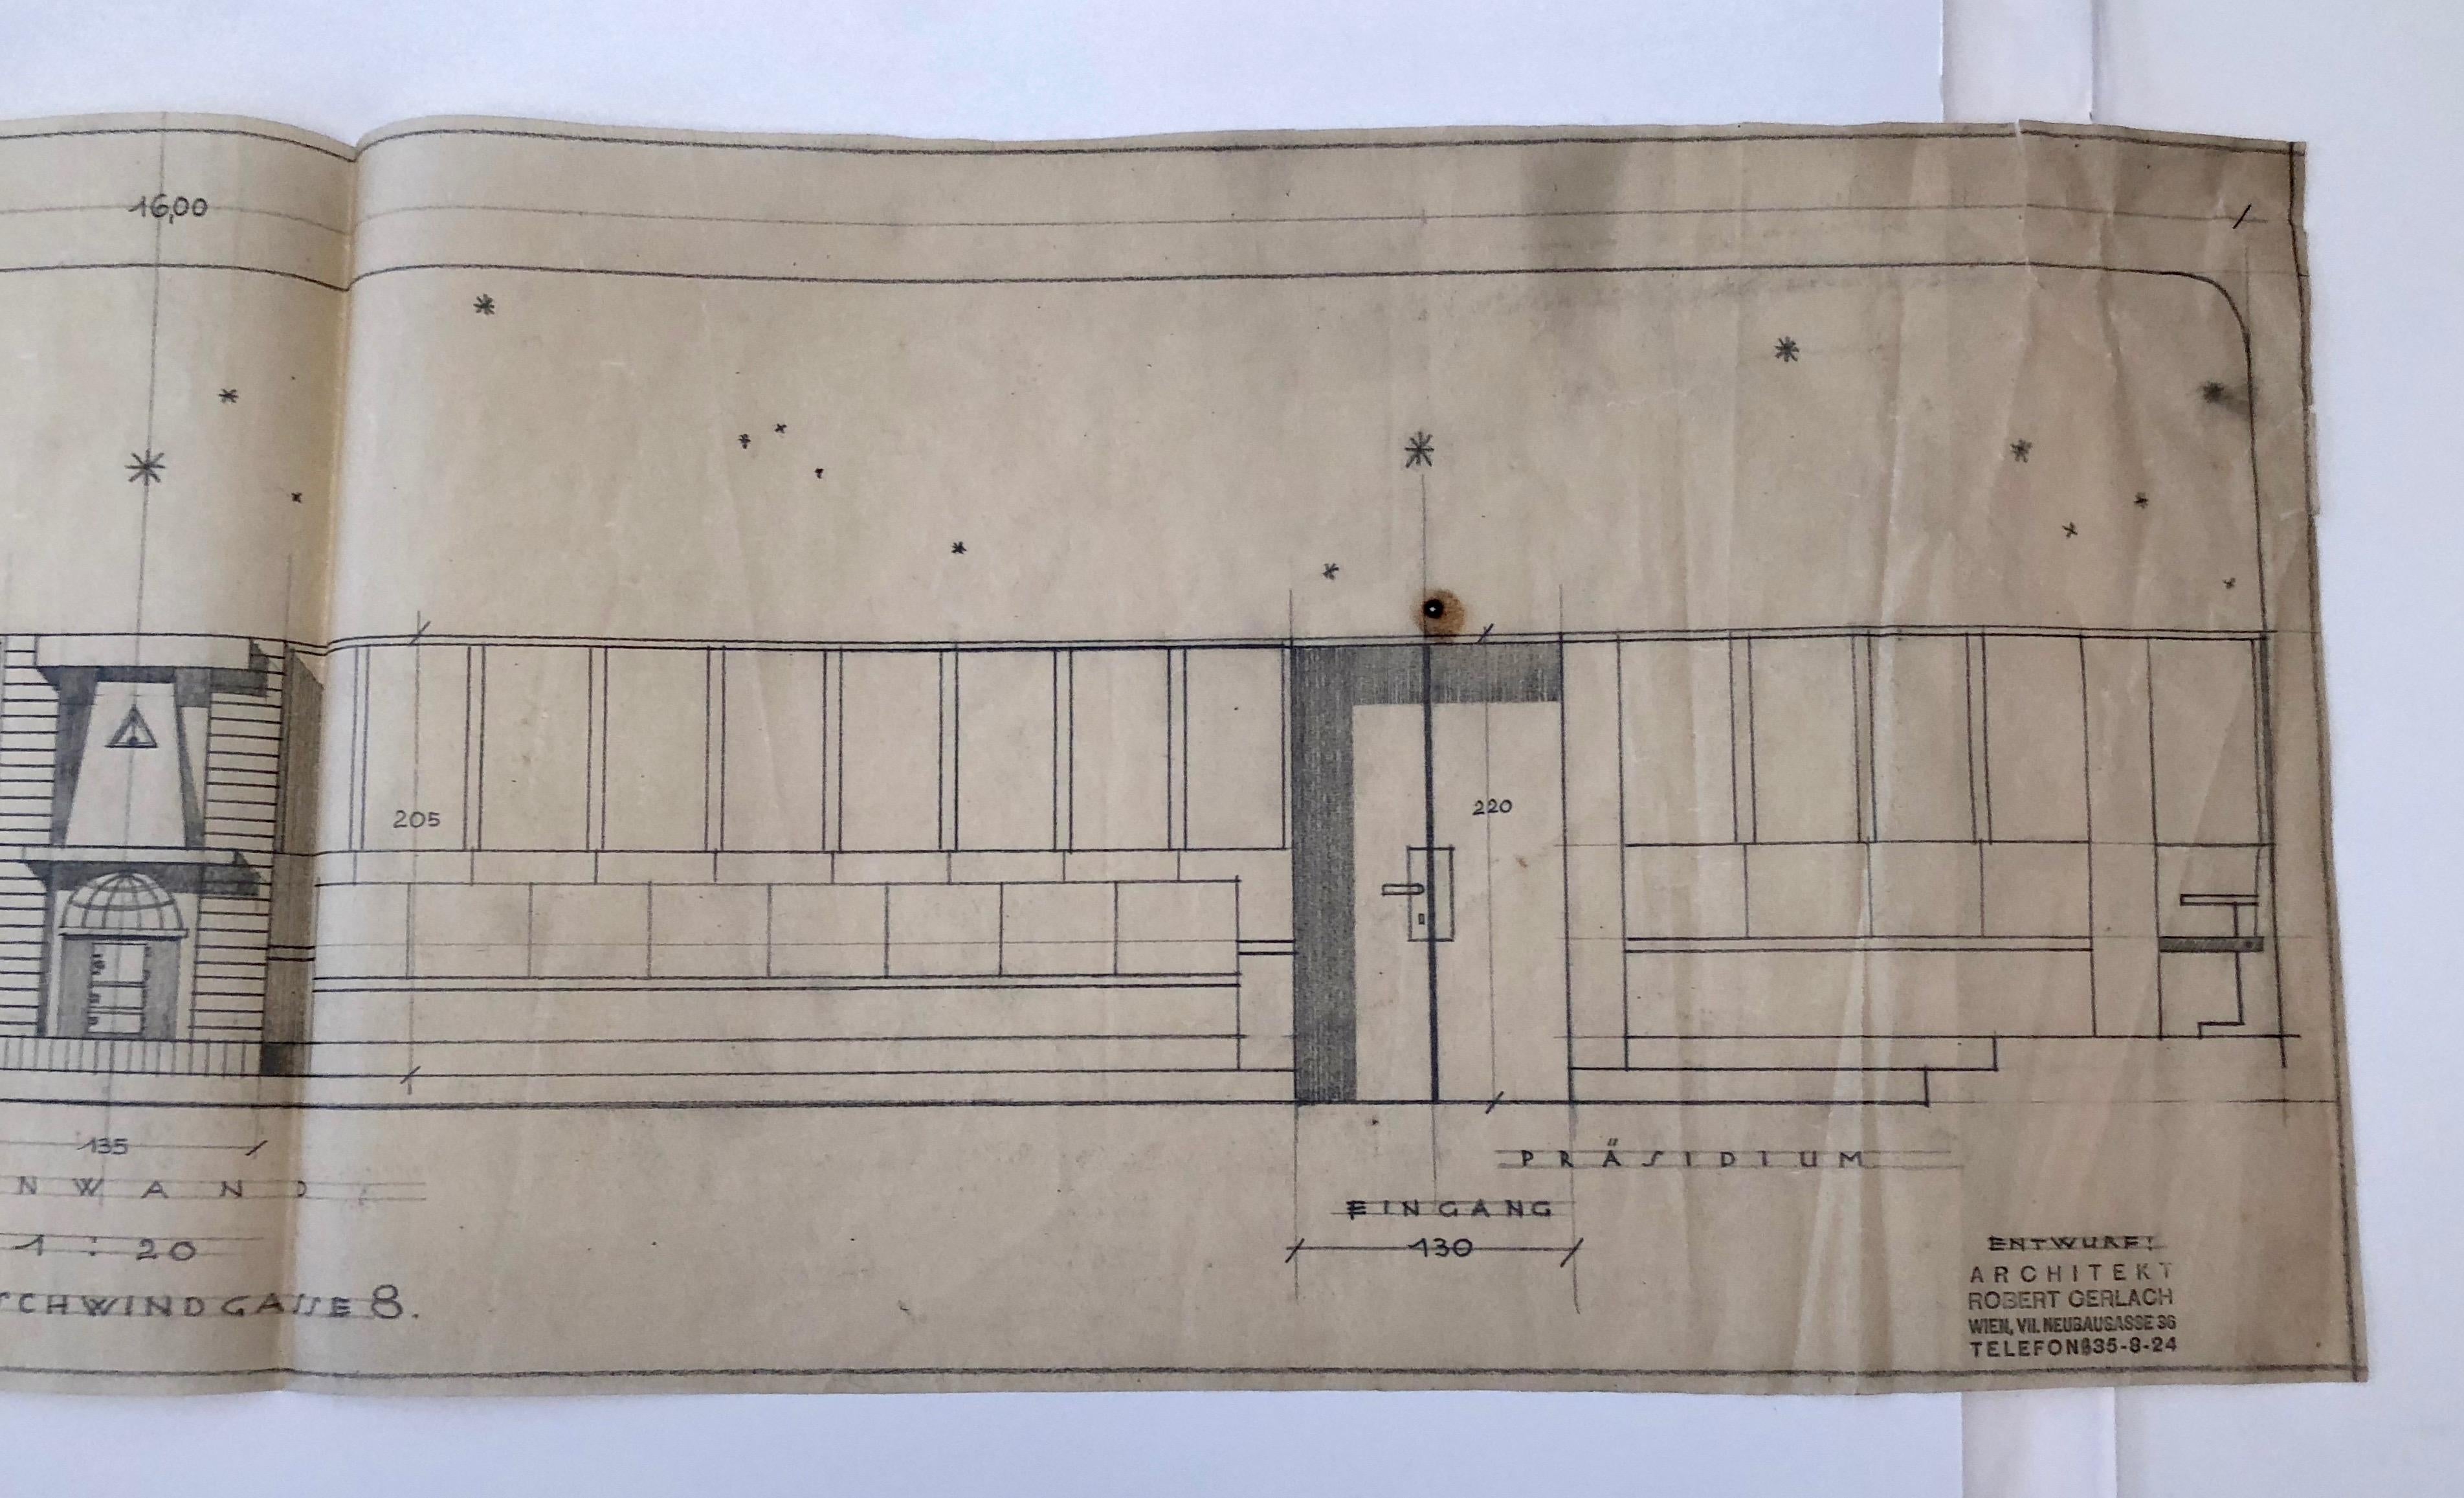 Set of Working Drawings, 1930, for a Free Masons Lodge, Schwind Gasse, Vienna For Sale 10